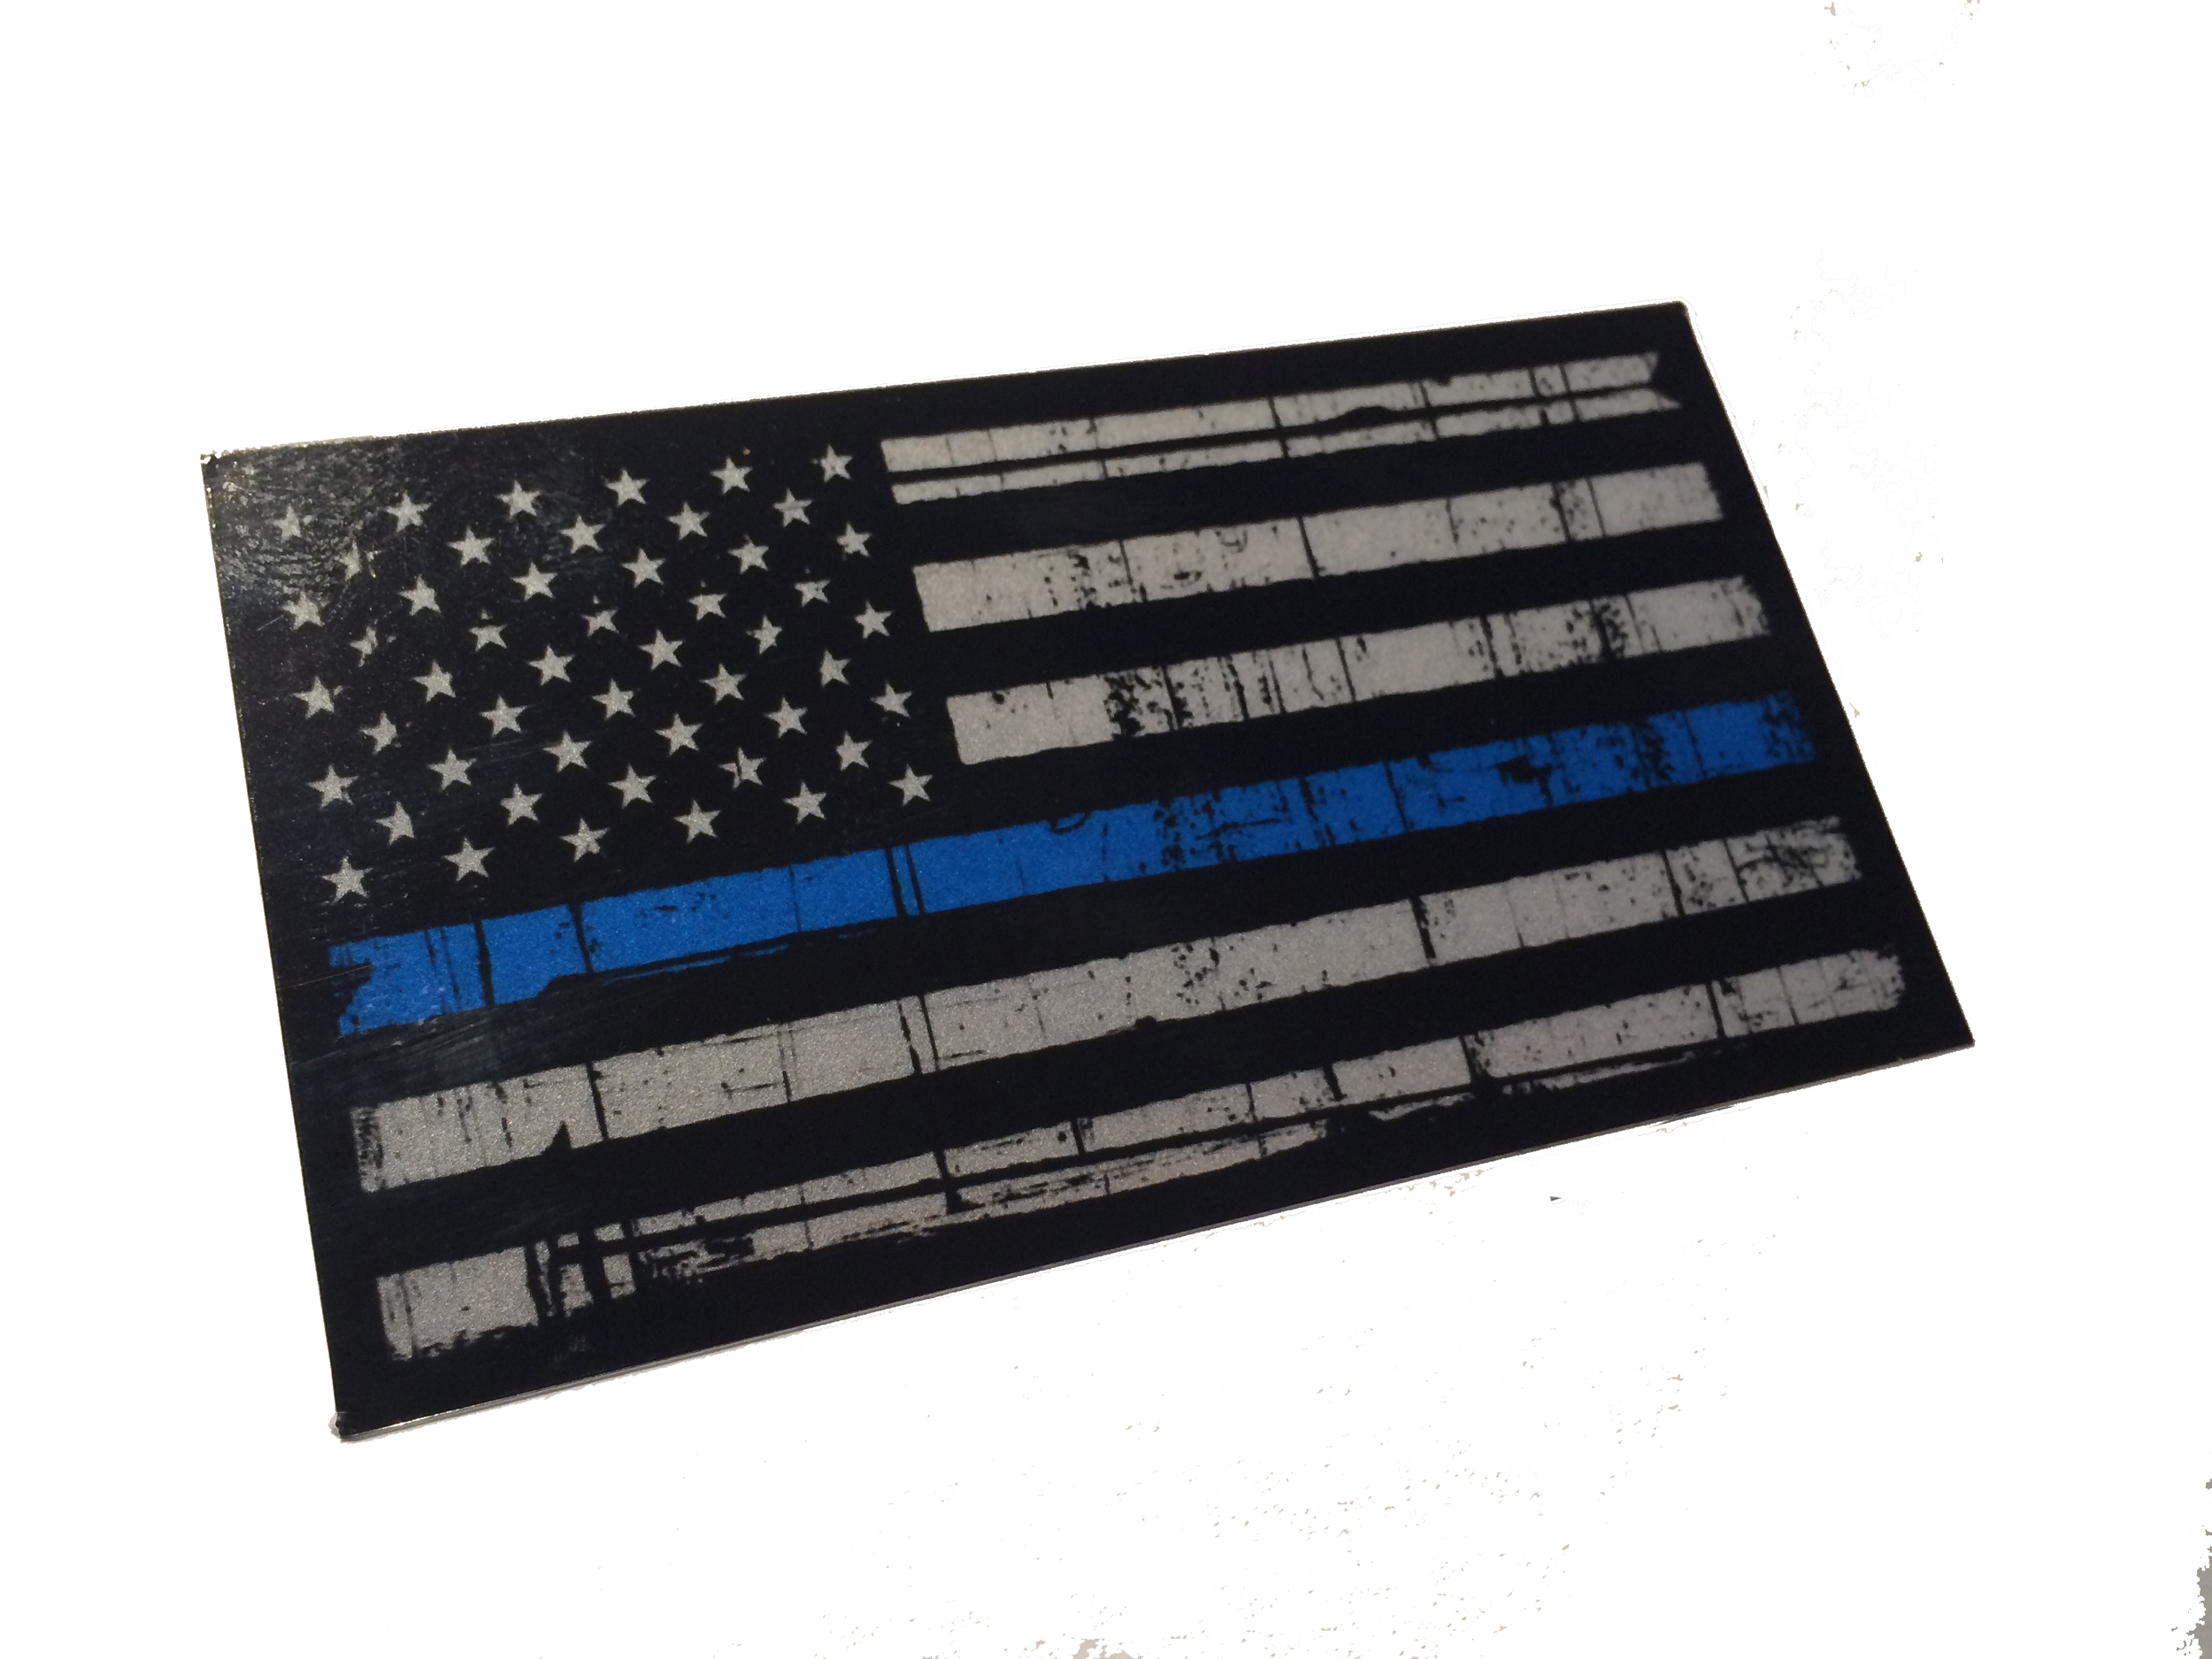 Police Officer Thin Blue Line reflective American Flag Decal Sticker 3.75x 2.25 